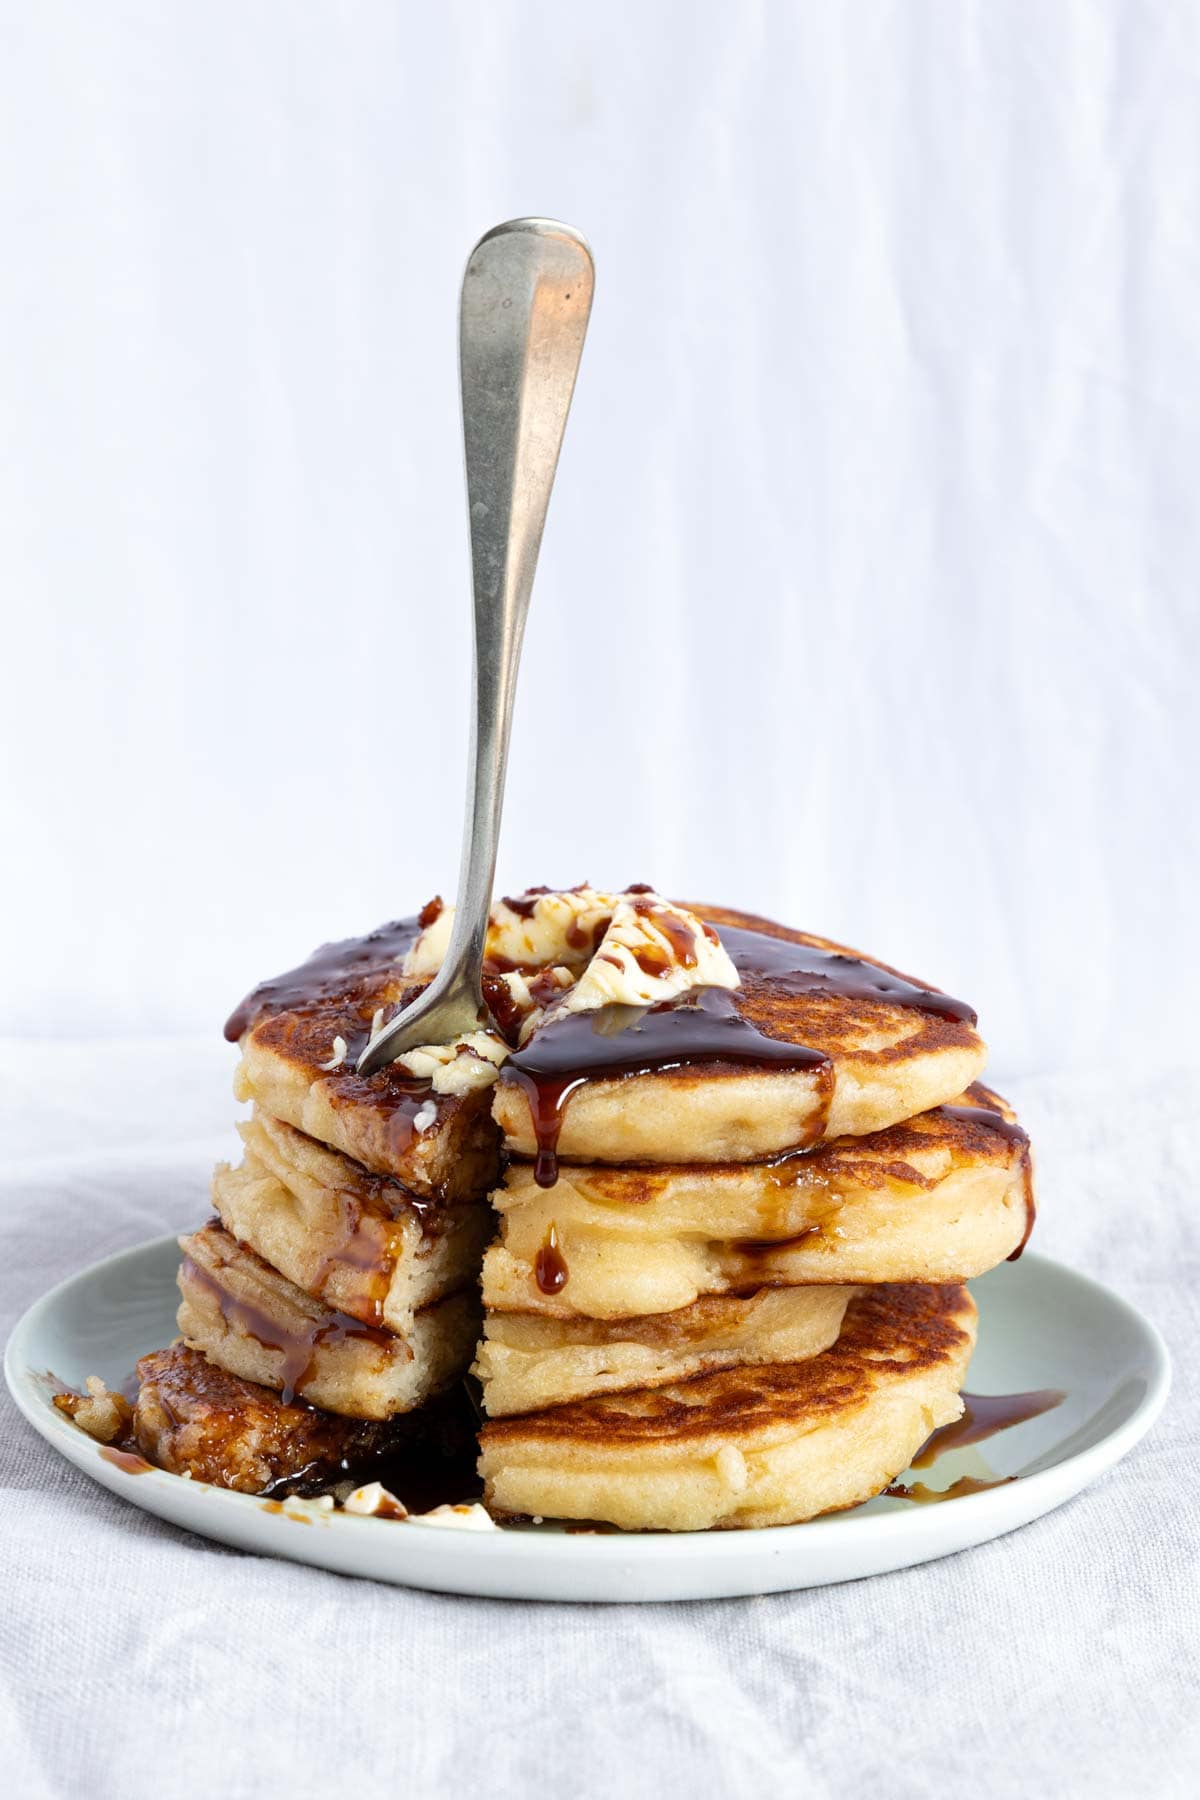 A stack of four fluffy pancakes with butter and syrup on a plate.